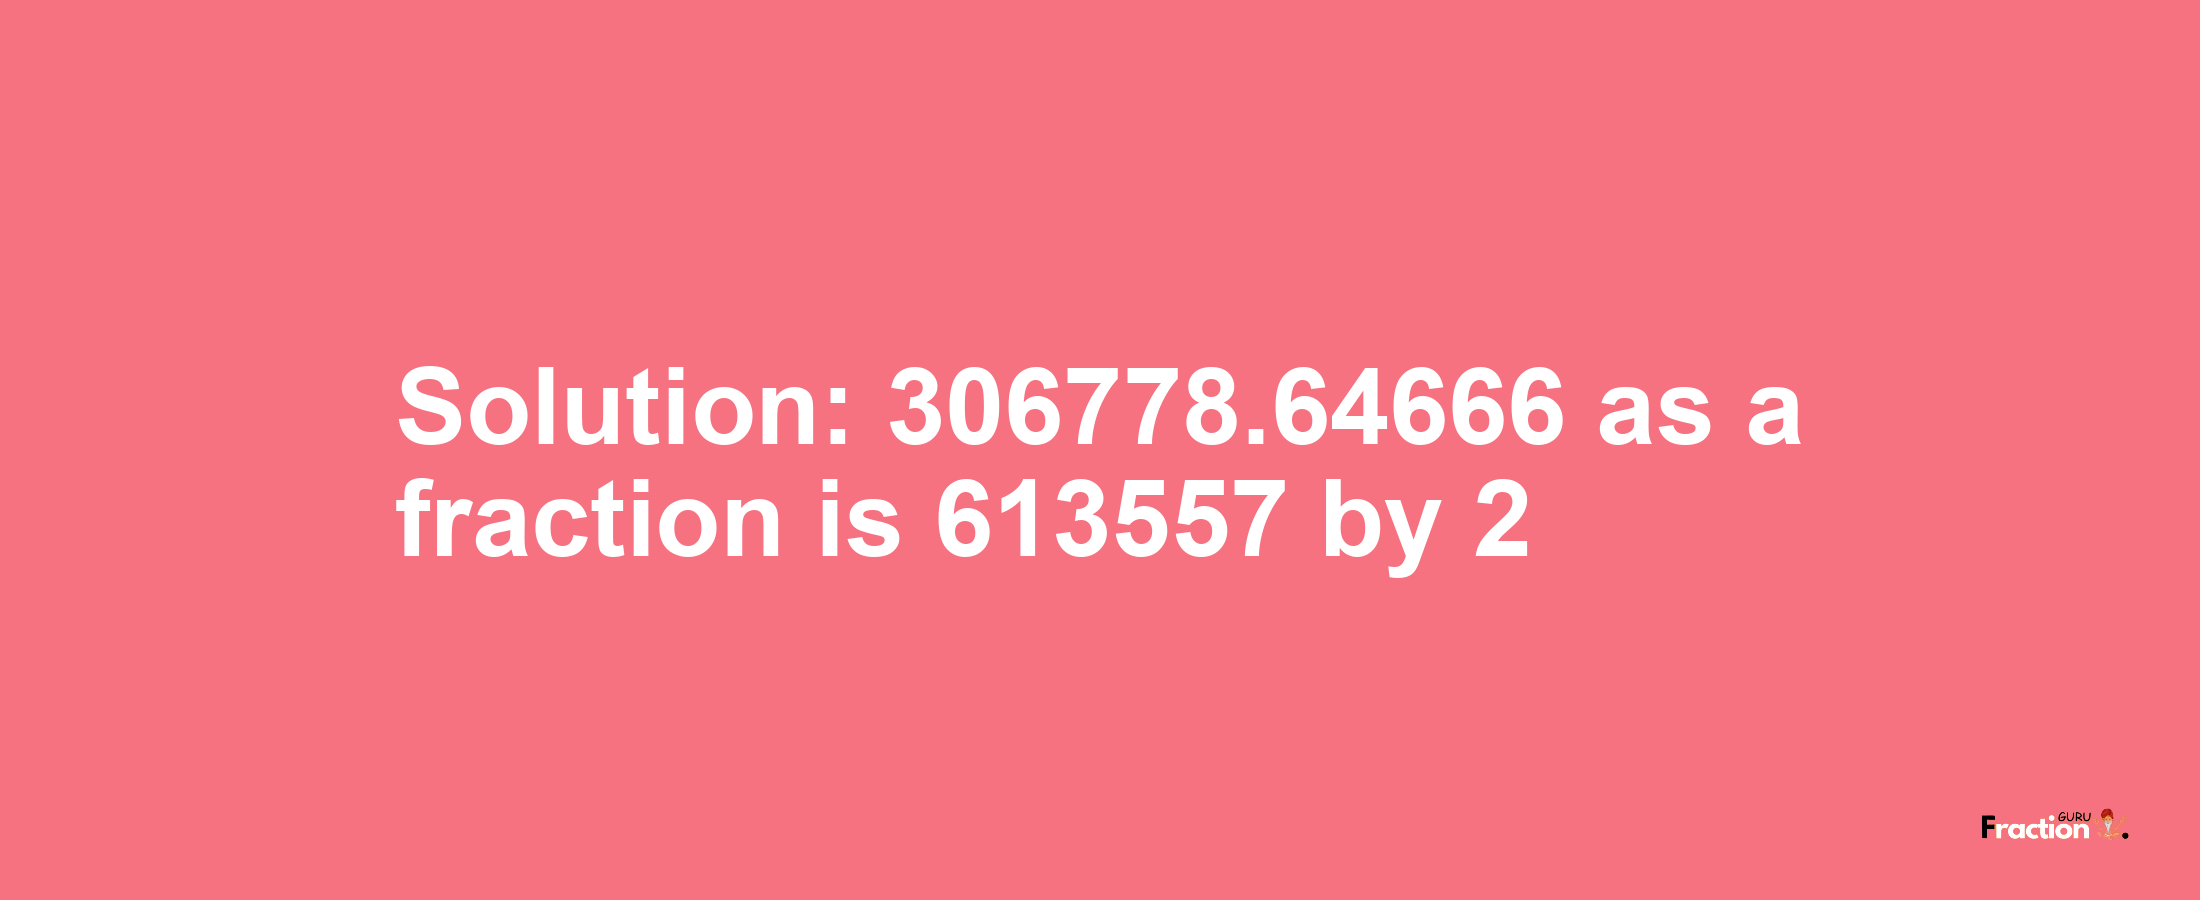 Solution:306778.64666 as a fraction is 613557/2